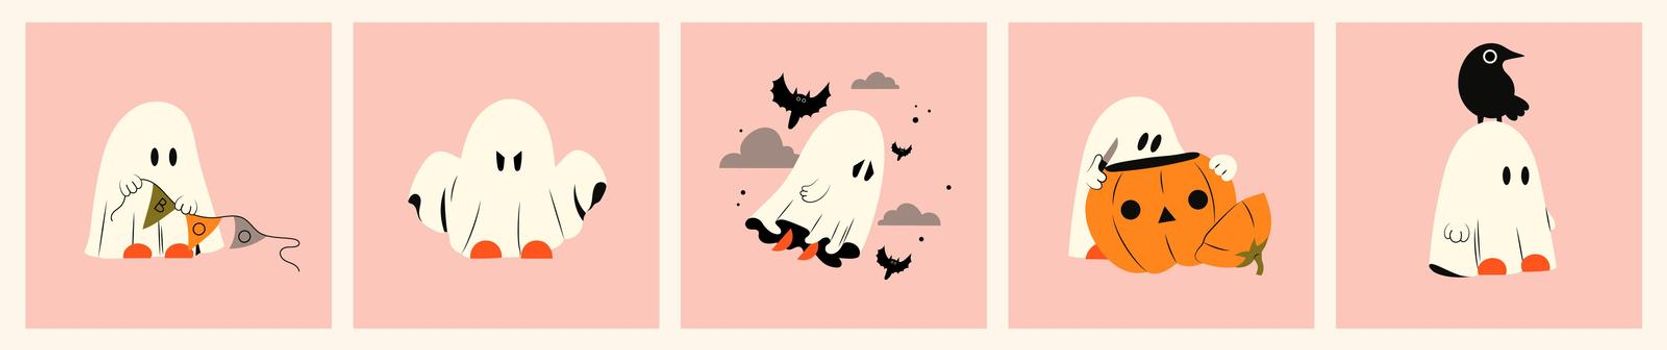 Set ghost emotional expression. Halloween phantom ghost with different character. Concept of mystical drawings for decoration. Flat vector illustration isolated on pink background.